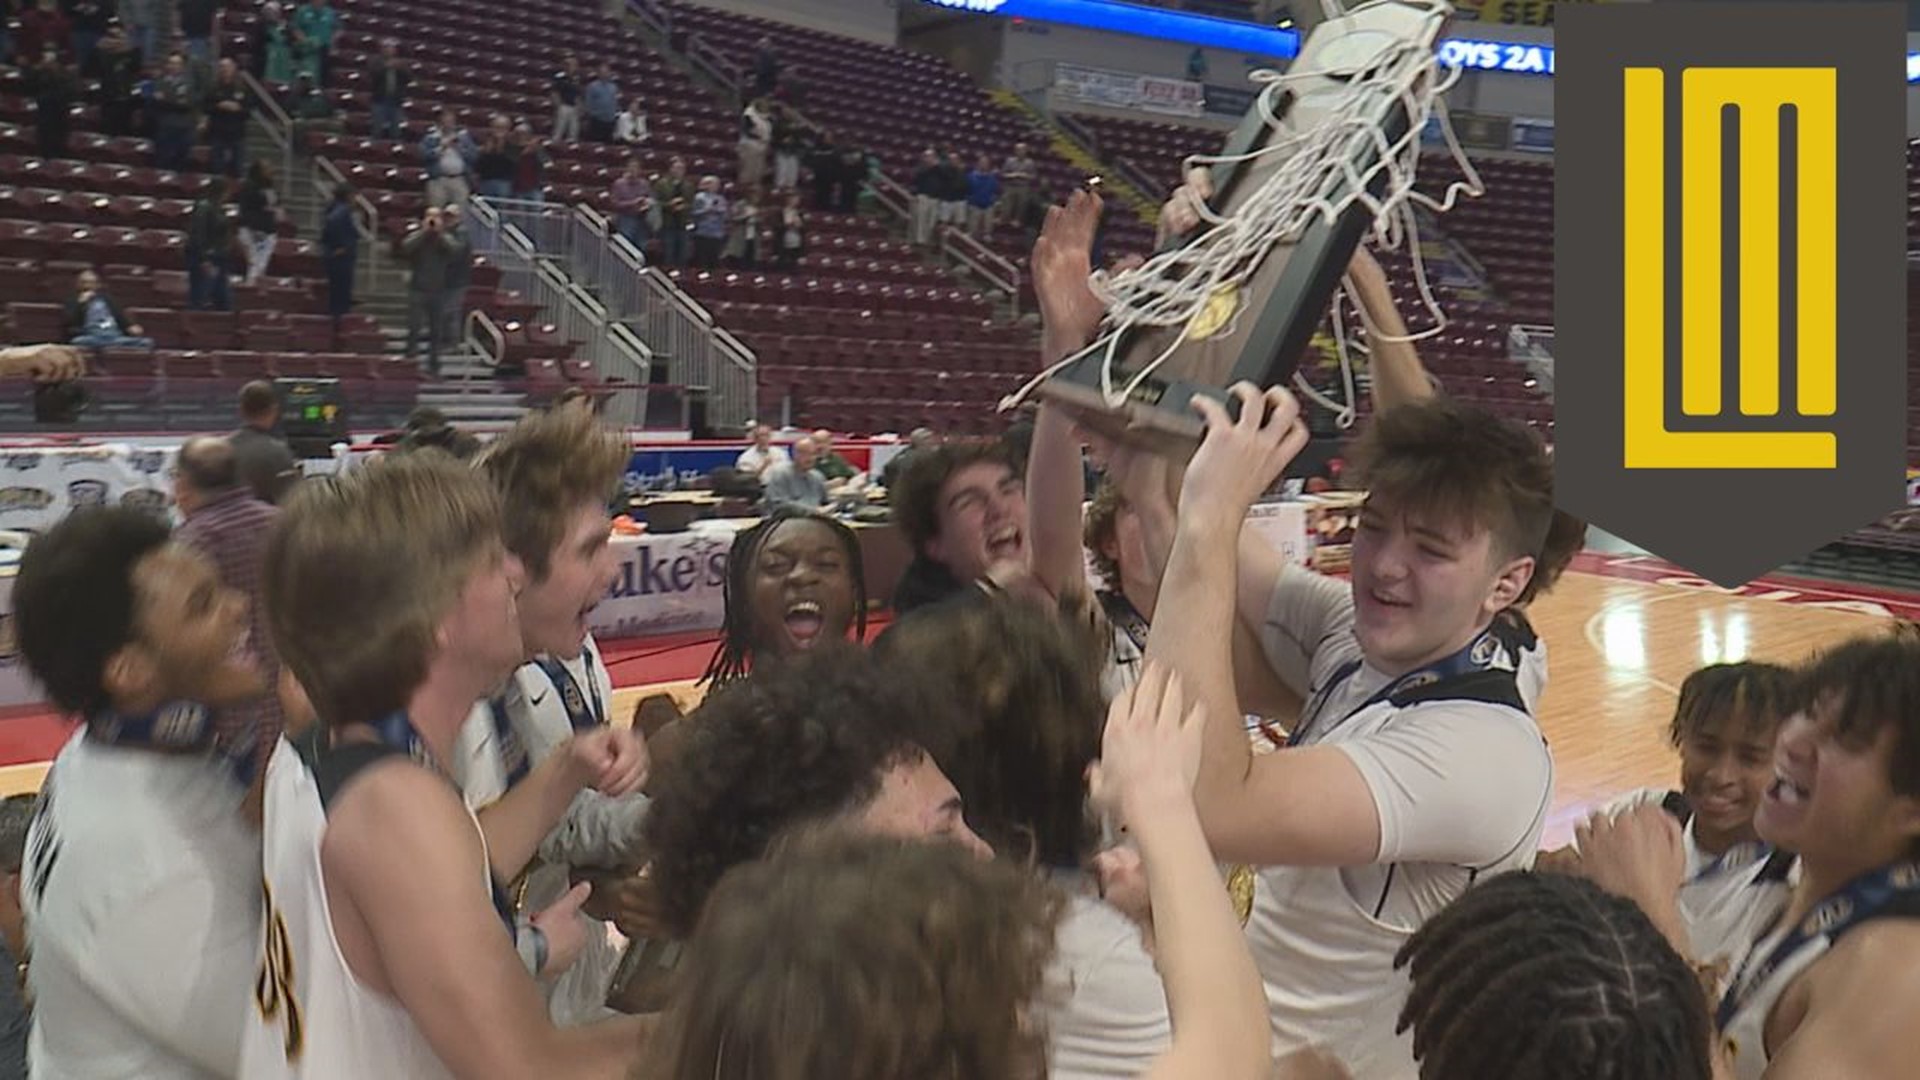 The Blazers stunned WPIAL champs Aliquippa, 60-44 at the Giant Center on Friday.